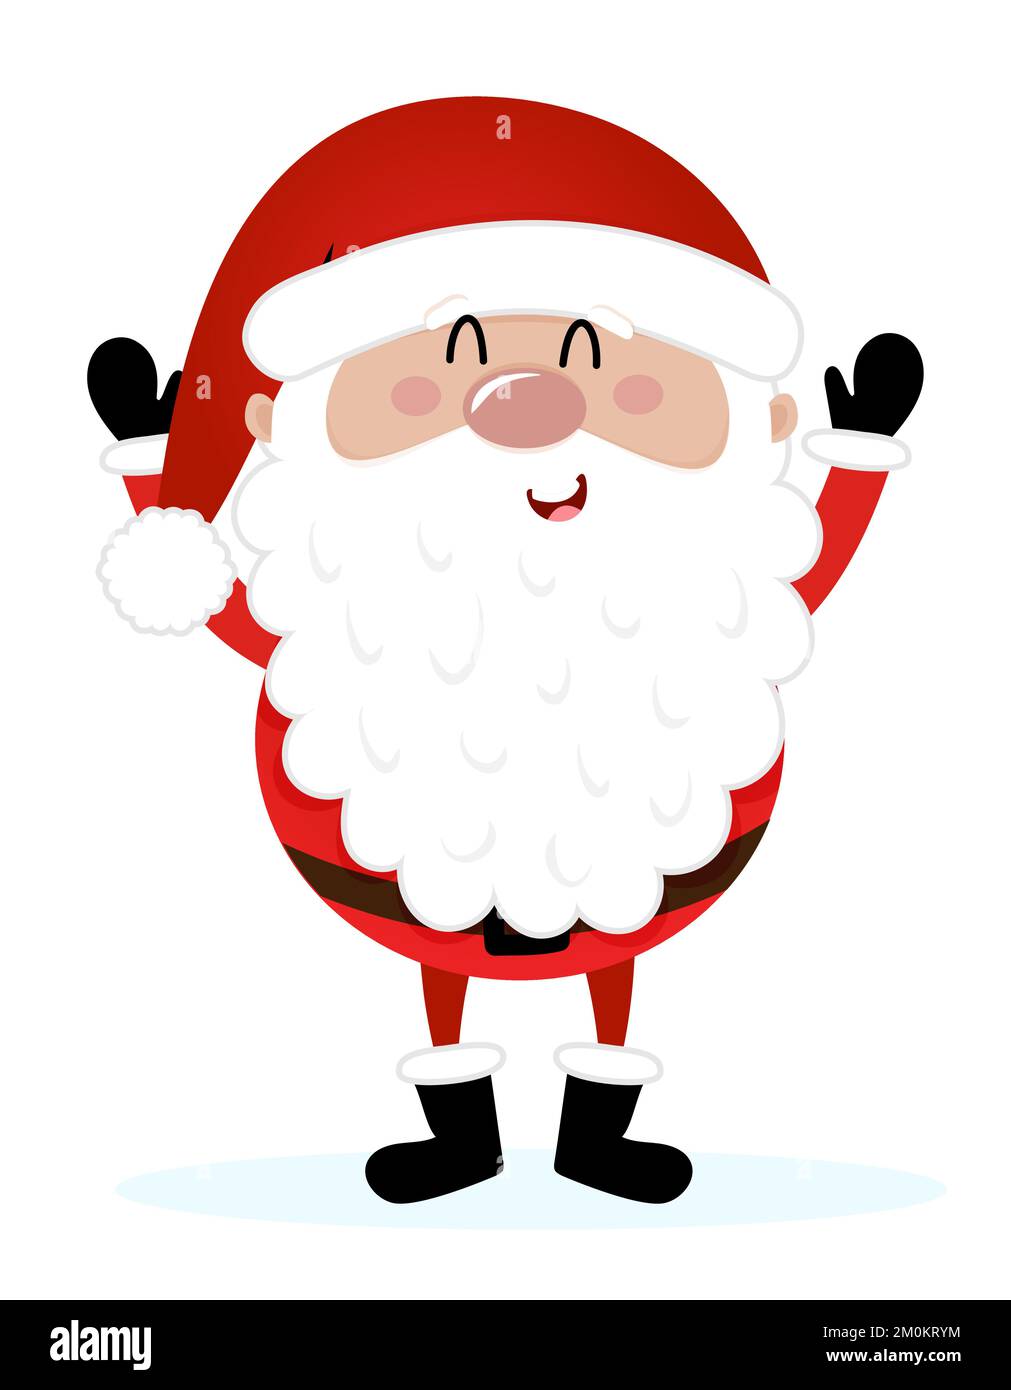 Waving Santa - illustration in cartoon style. Merry Christmas and happy new year. Funny characters in Santa's workshop. Stock Vector